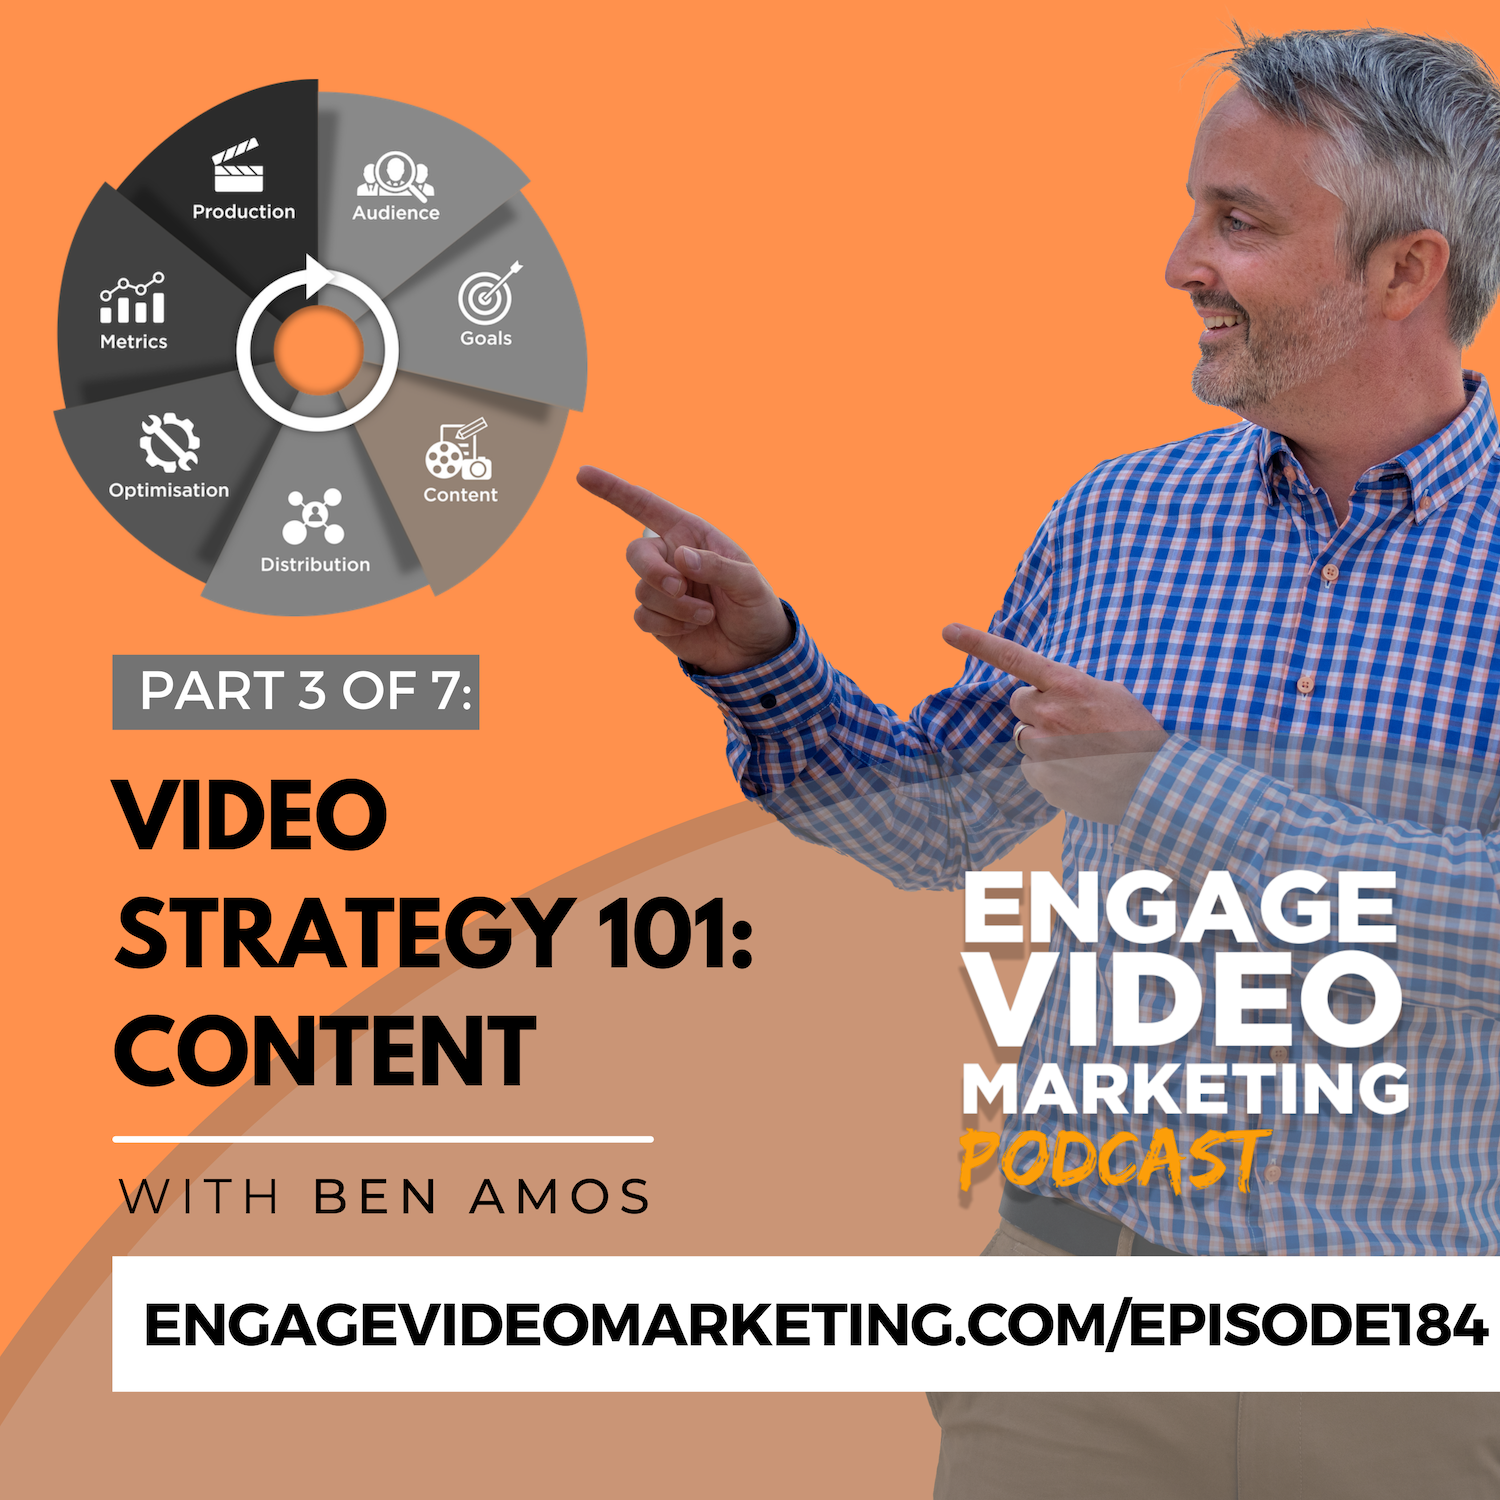 Video Strategy 101: Content